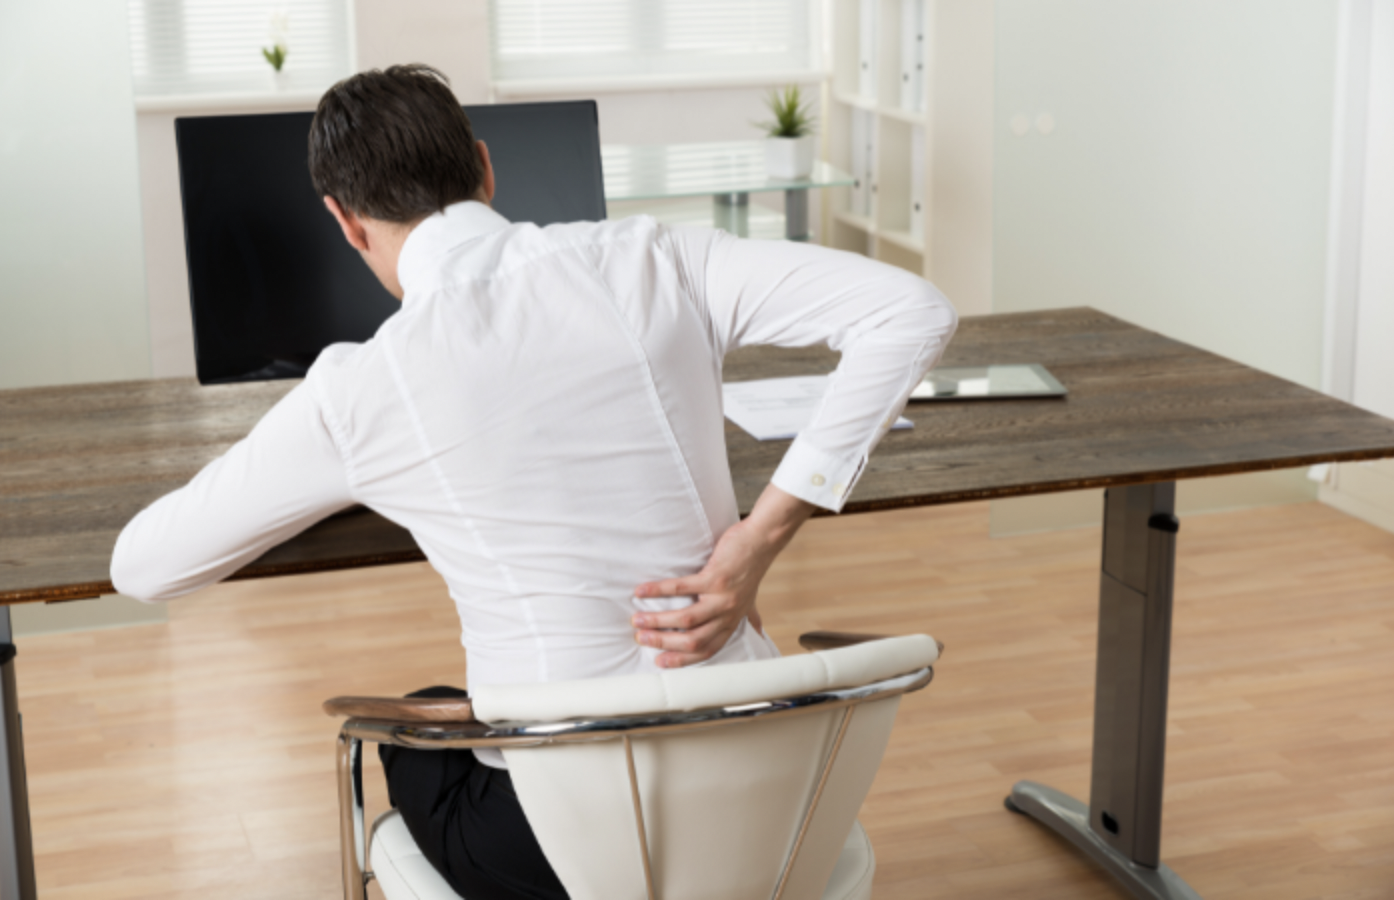 Good News For People With Chronic Back Pain – New Treatment Could Offer ‘Dramatic’ Relief